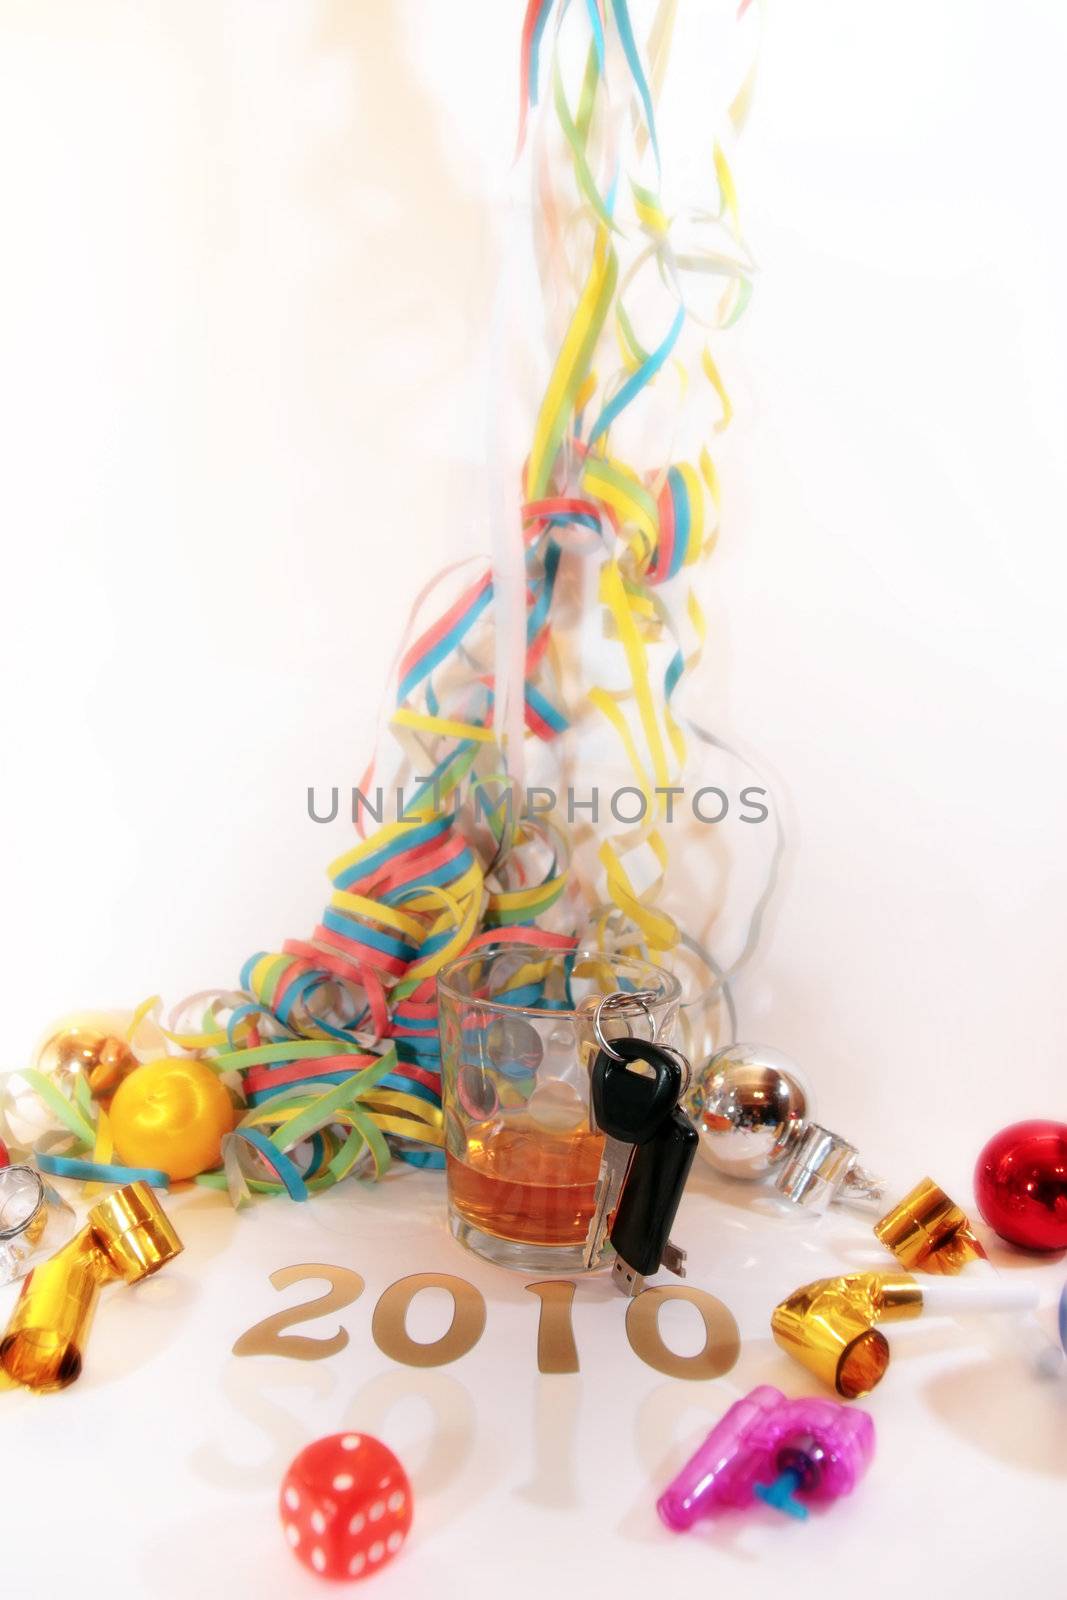 whiskey glass with keys in glass on white background depicting drunk driving and addictions can kill